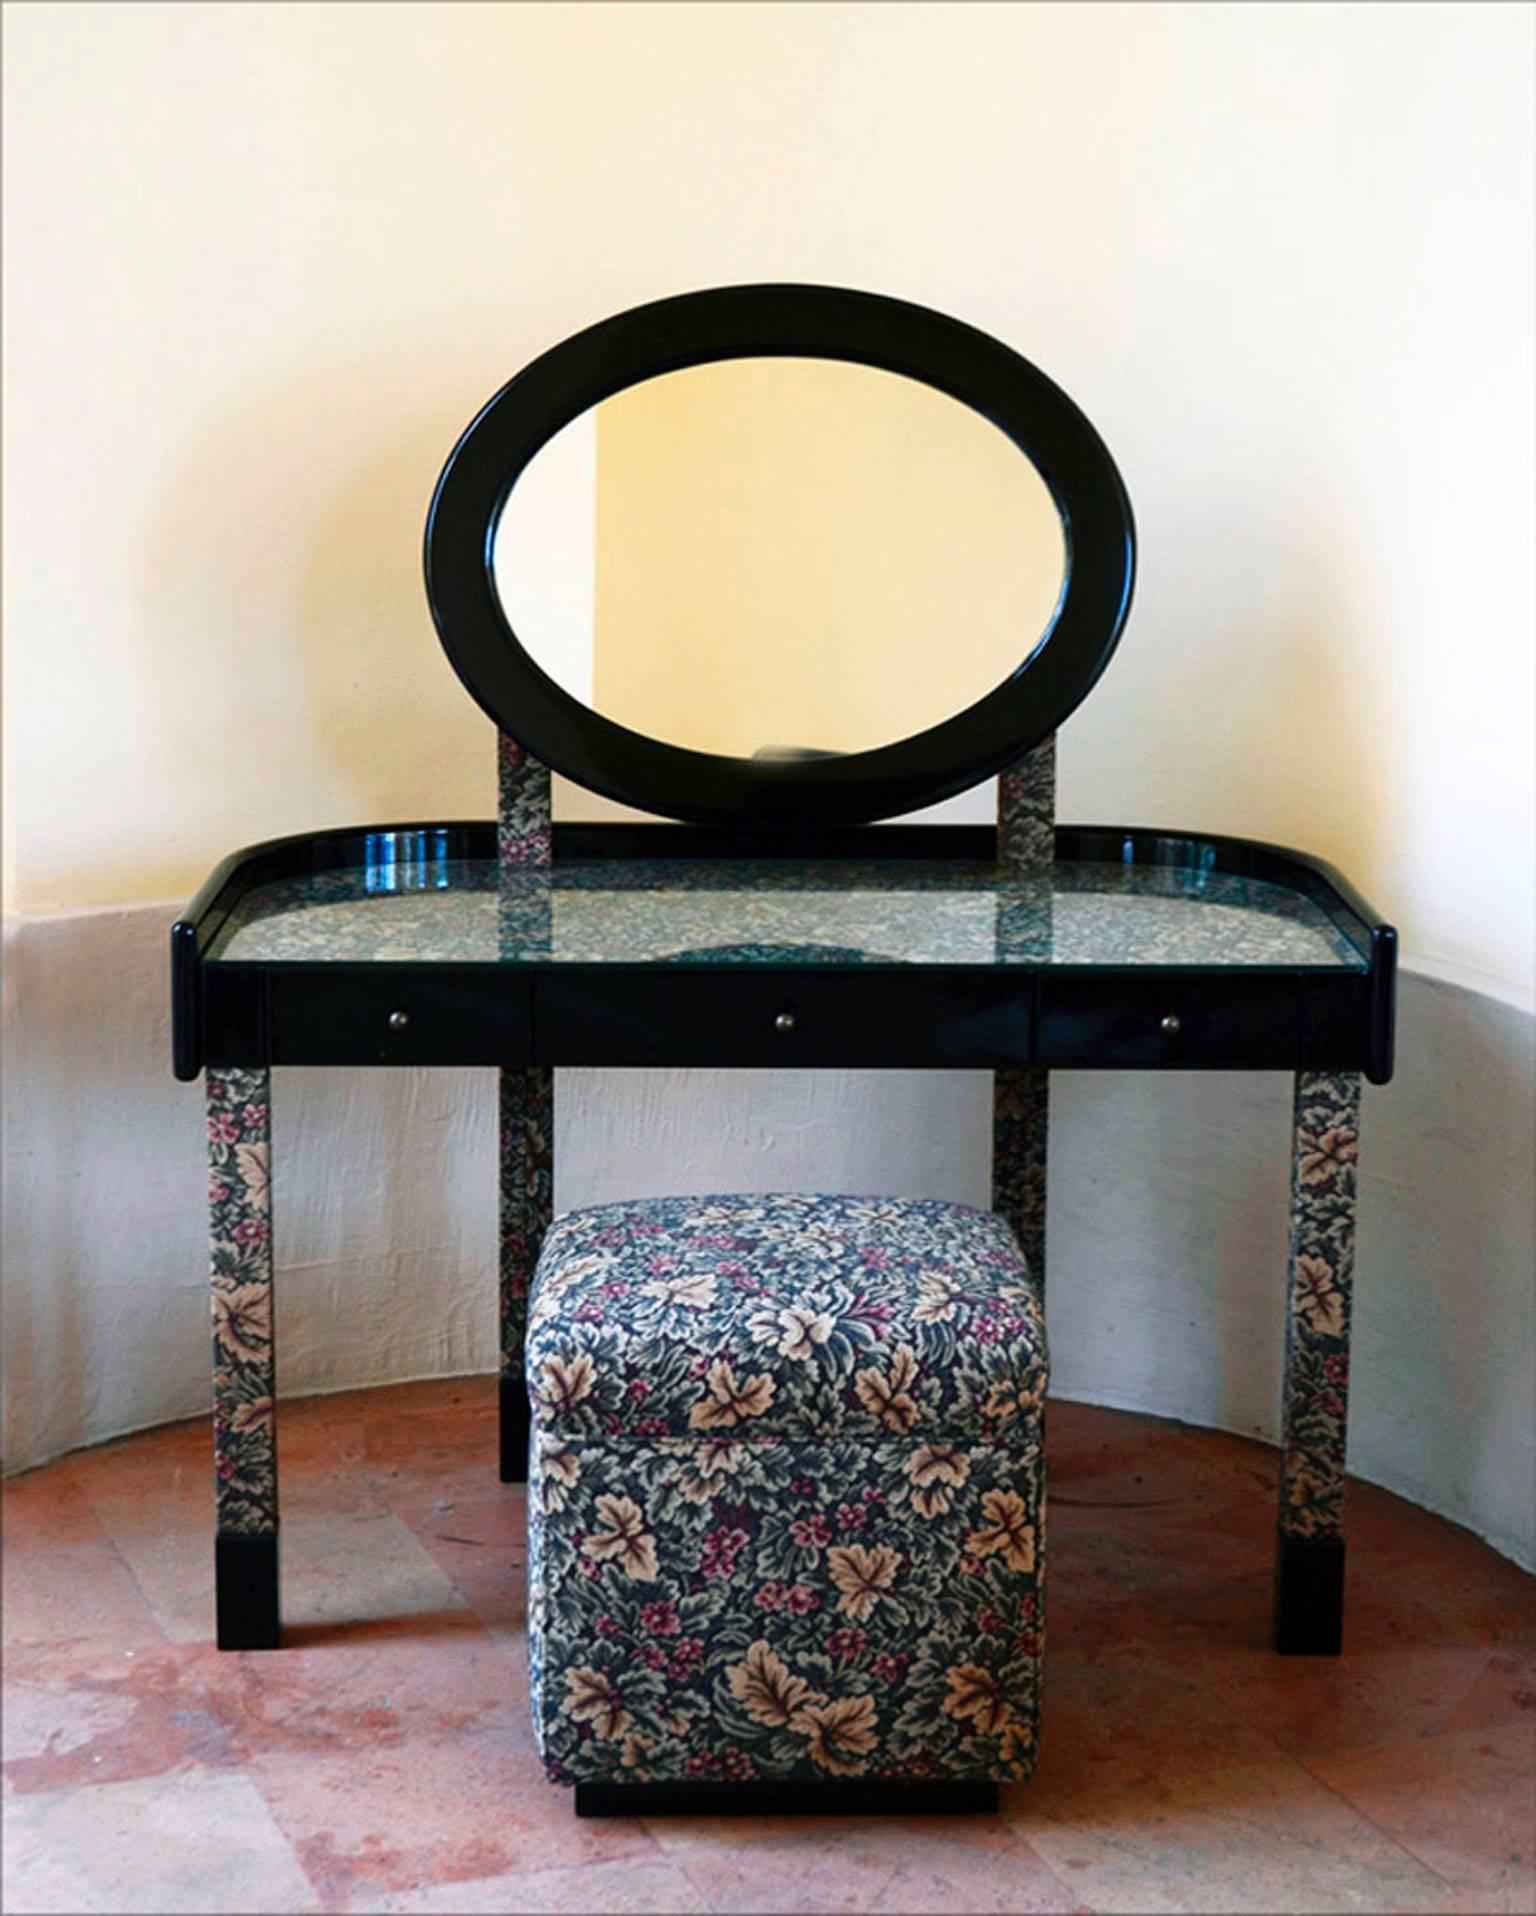 Toilette with pouf, designed by Franco Maria Ricci for SCIC, 1980s.
Painted wood with brocade fabric and details in brass.
Pouf dimensions: cm W 48 x D 48 x H 47.